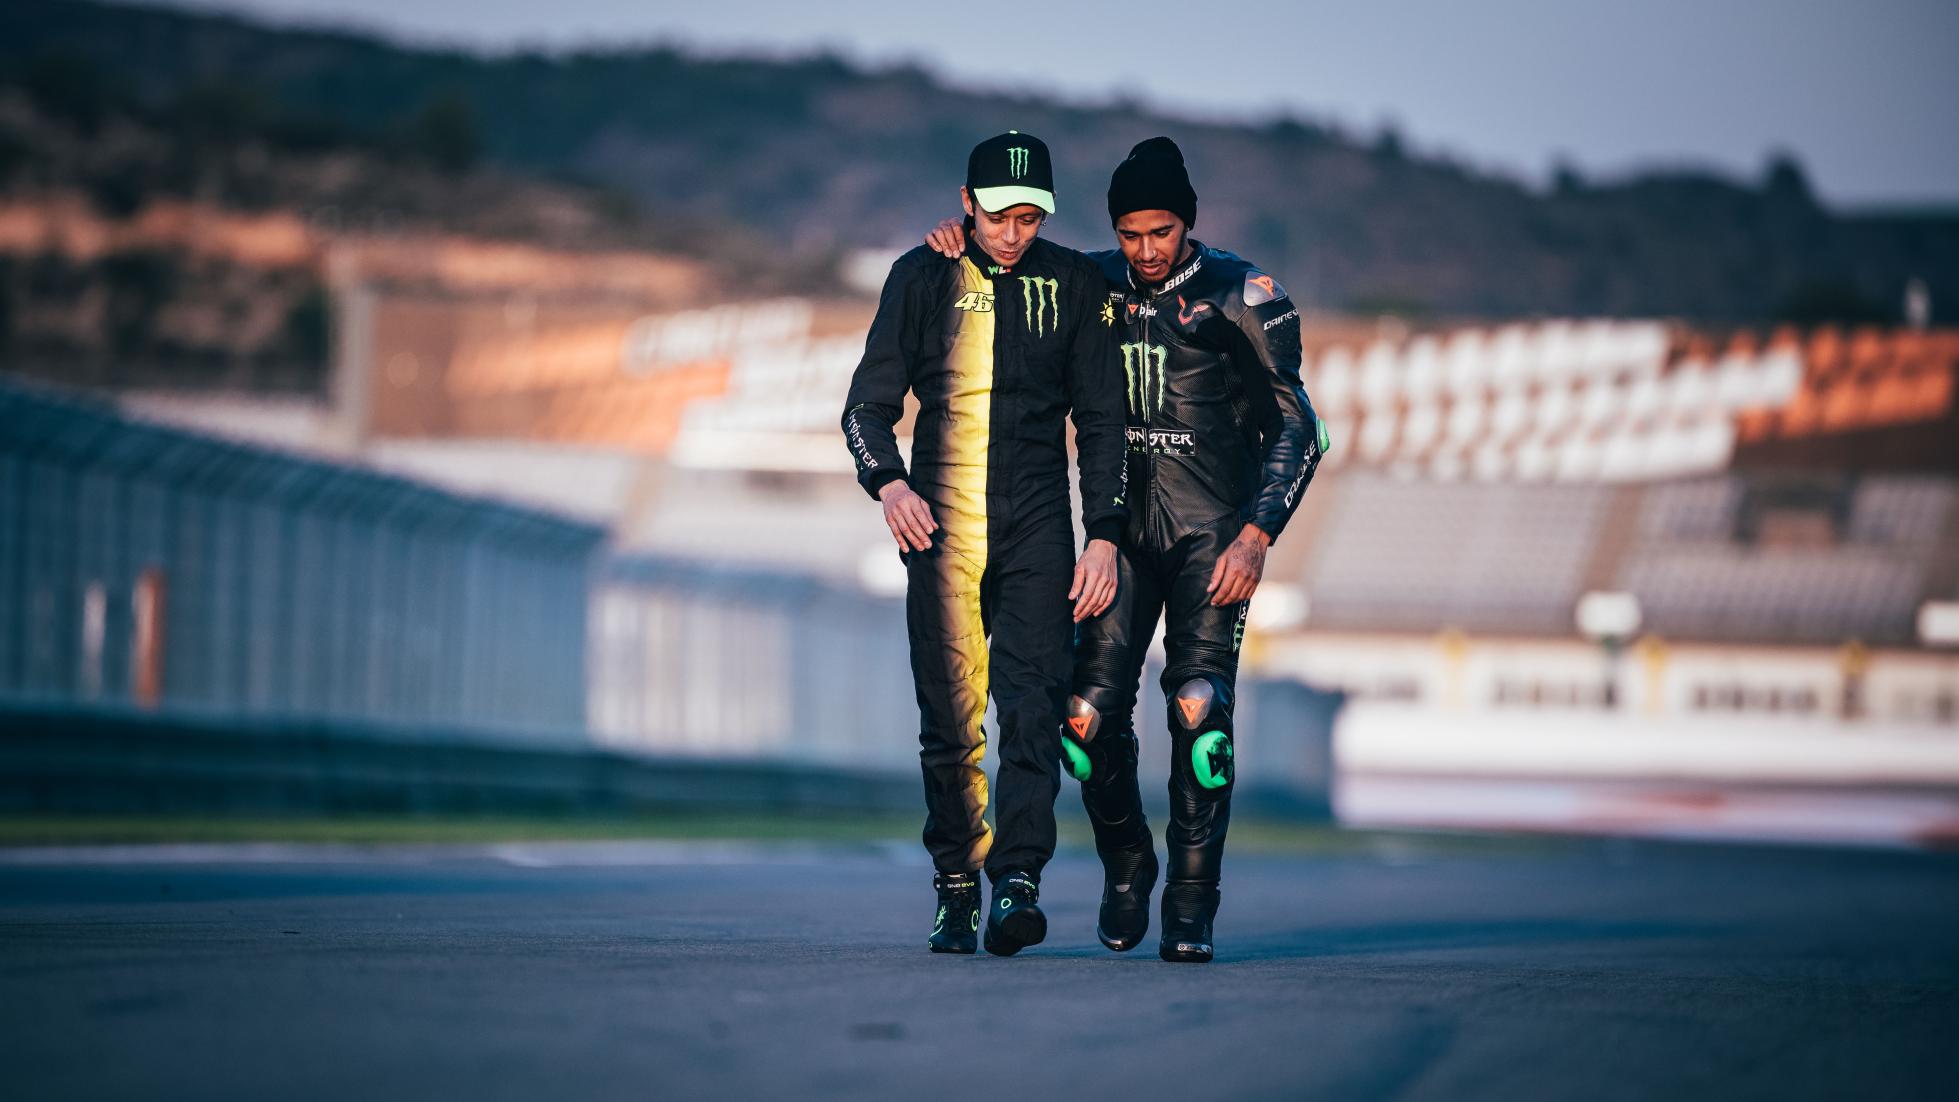 LH44 and VR46